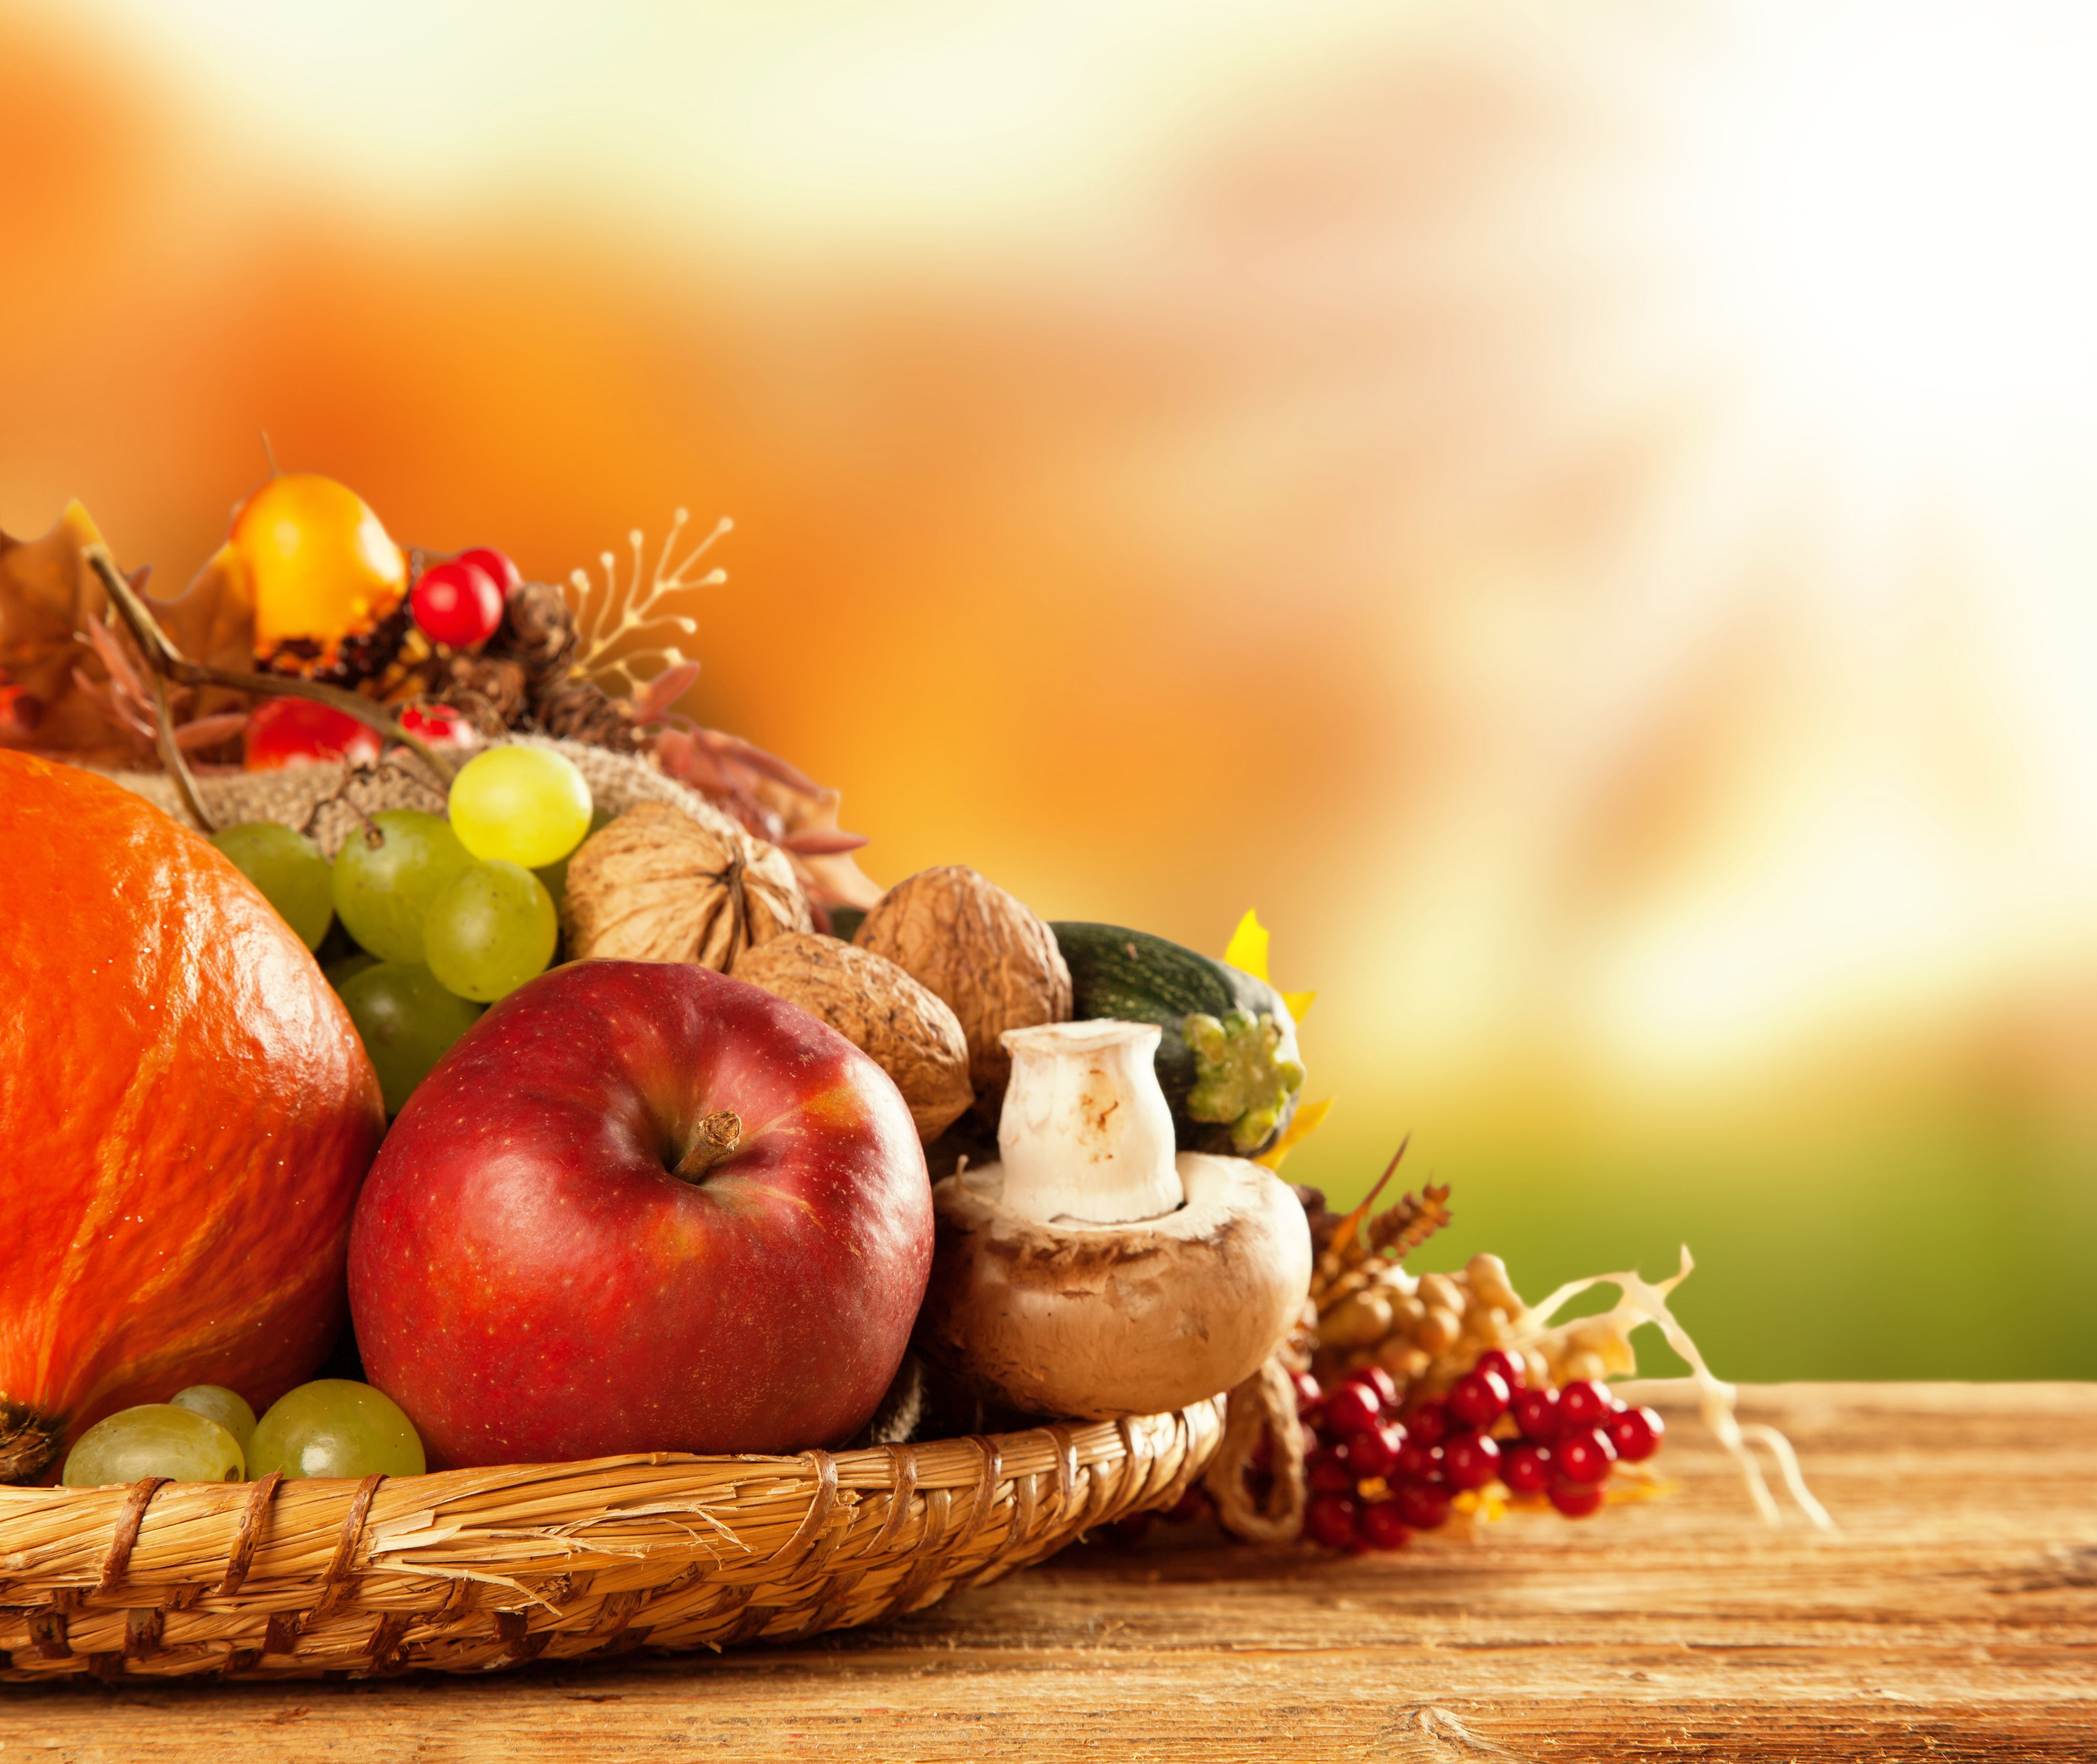 Autumn Fruits and Vegetables Background​-Quality Image and Transparent PNG Free Clipart